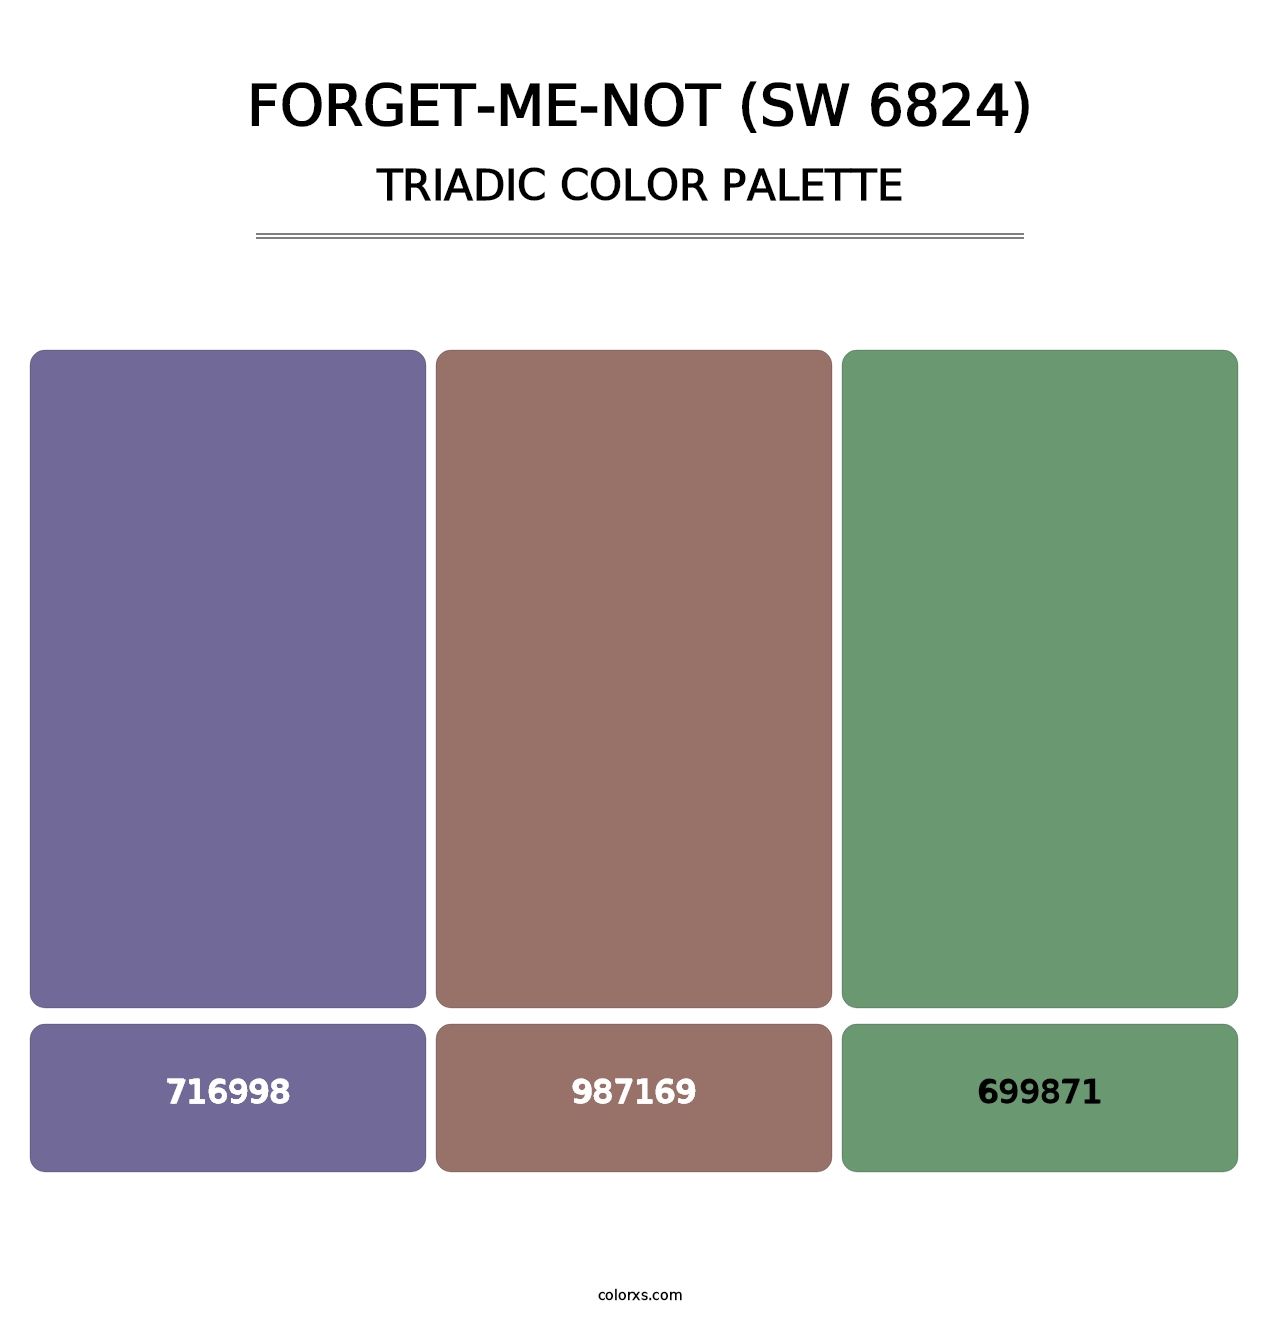 Forget-Me-Not (SW 6824) - Triadic Color Palette